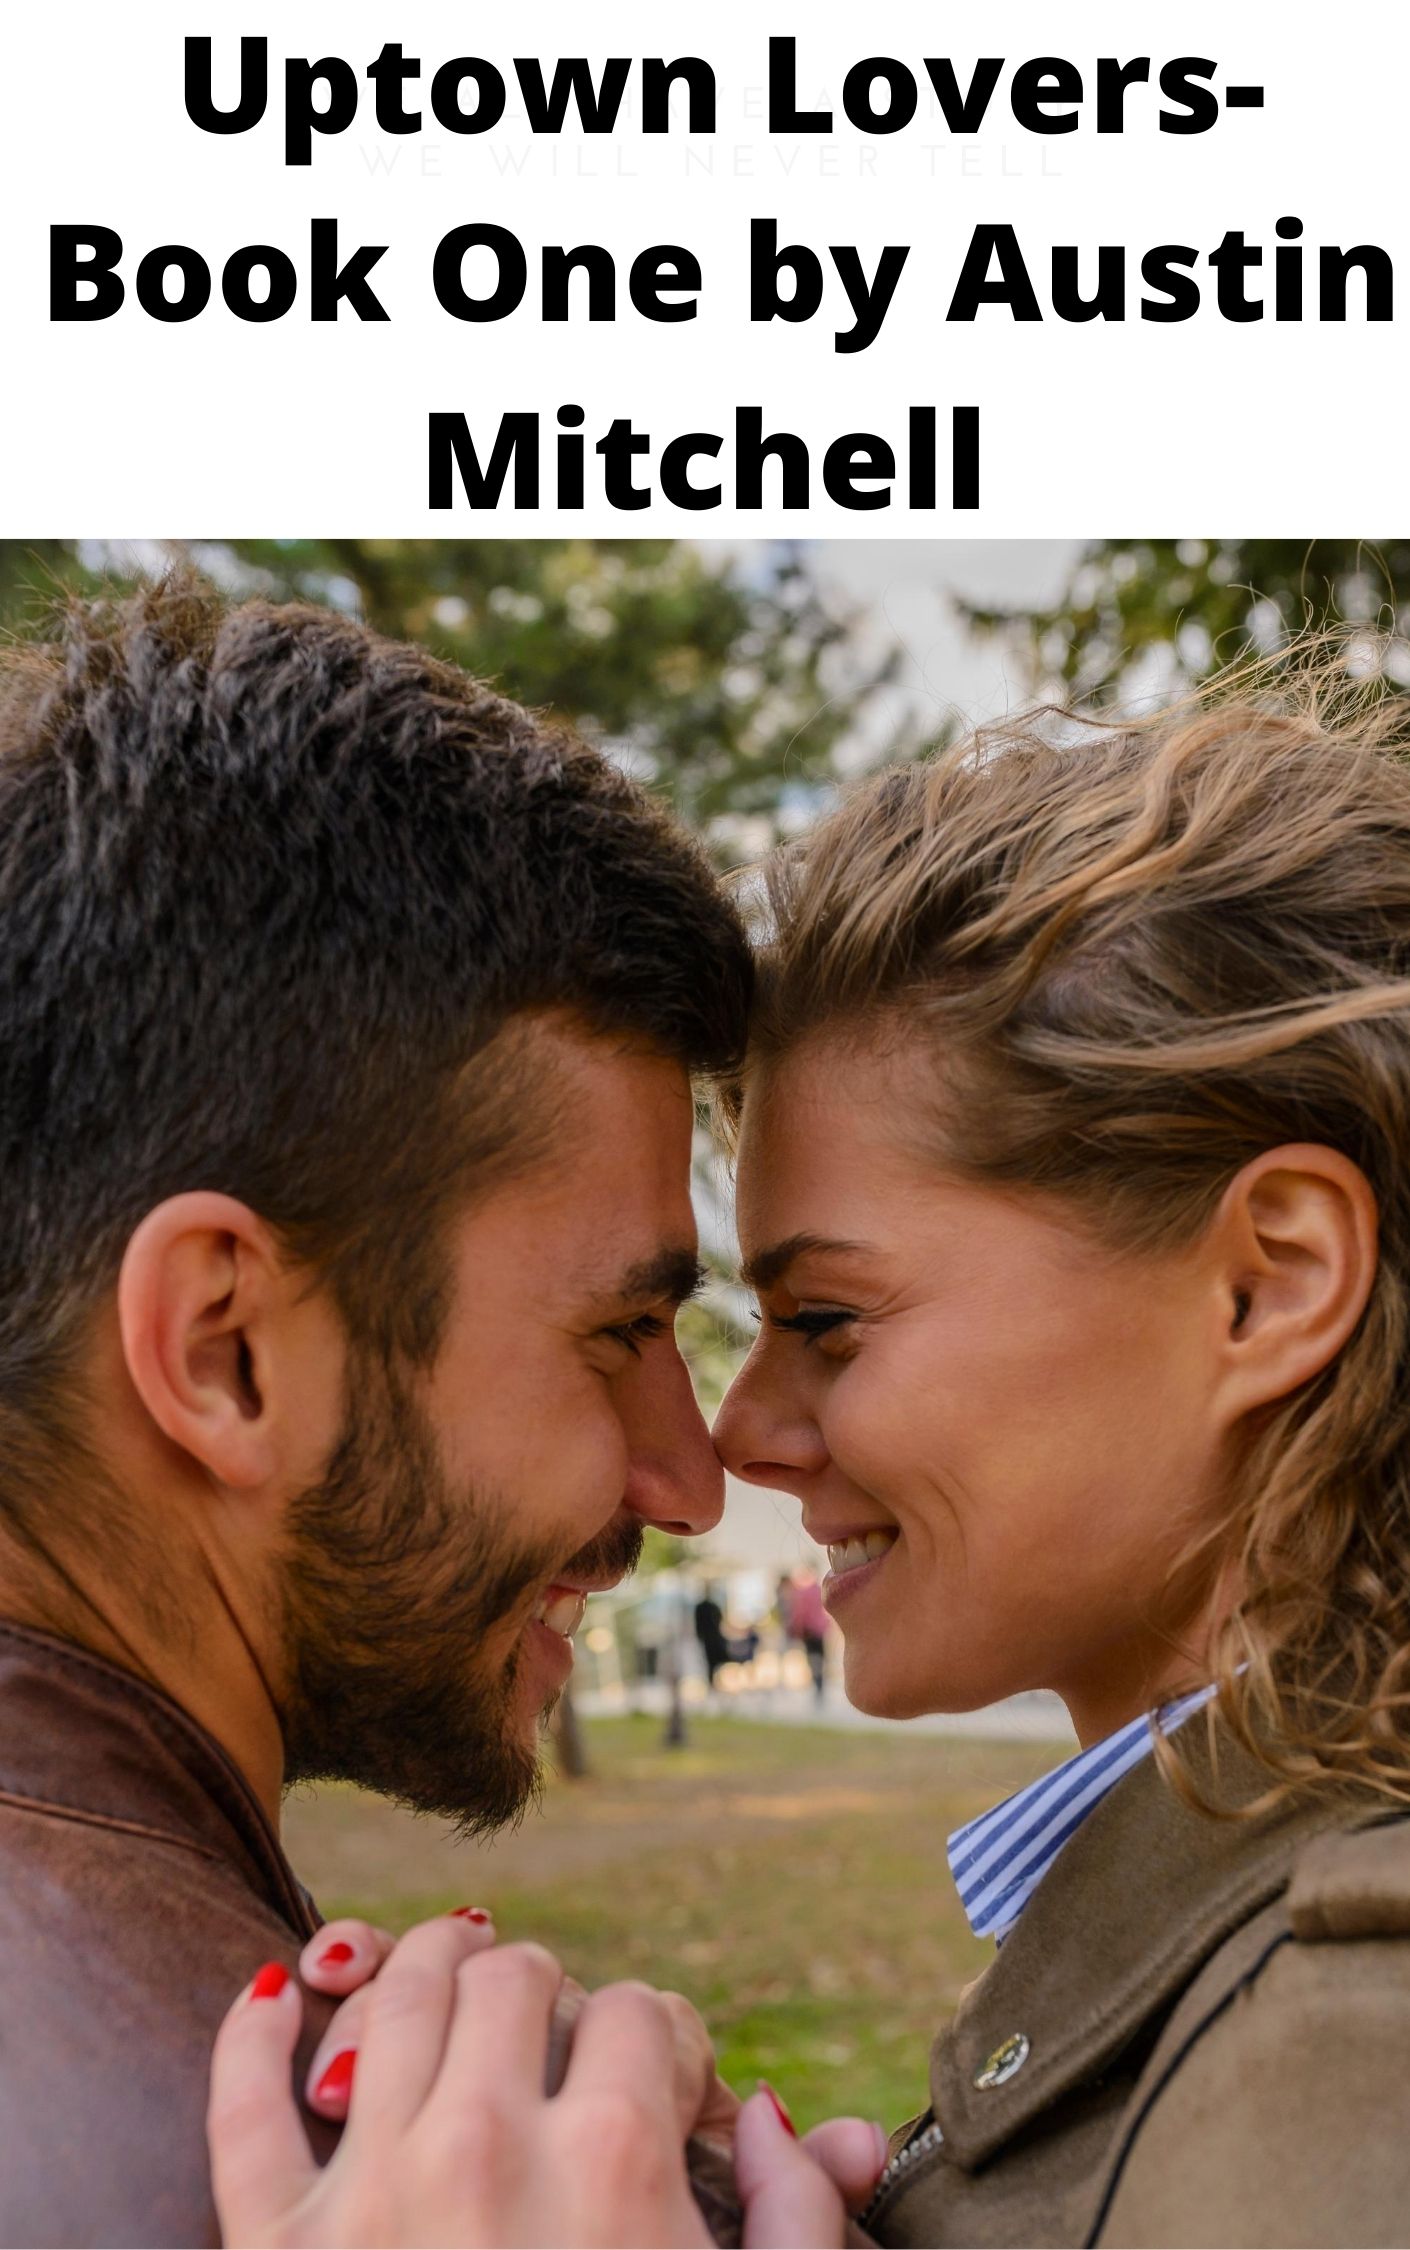 FREE: Uptown Lovers-Book One by Austin Mitchell